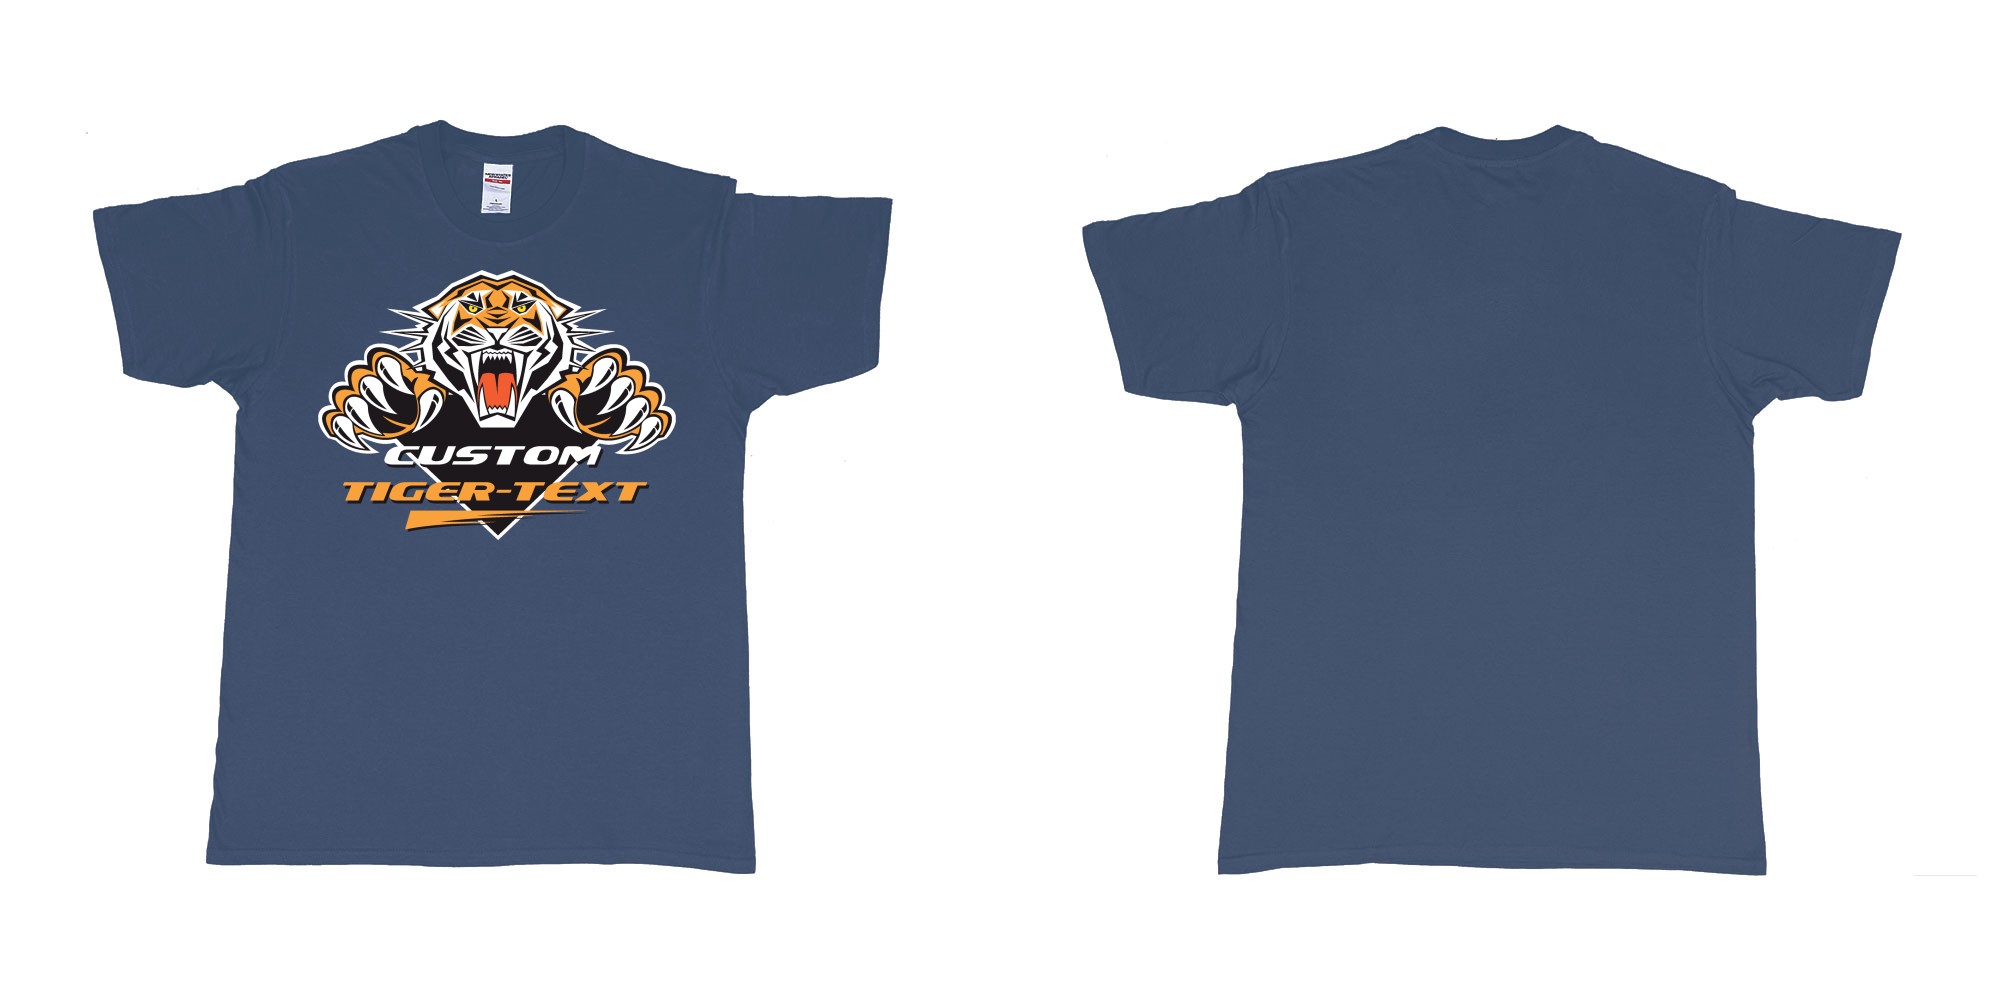 Custom tshirt design the wests tigers sydney national rugby league custom tshirt print in fabric color navy choice your own text made in Bali by The Pirate Way